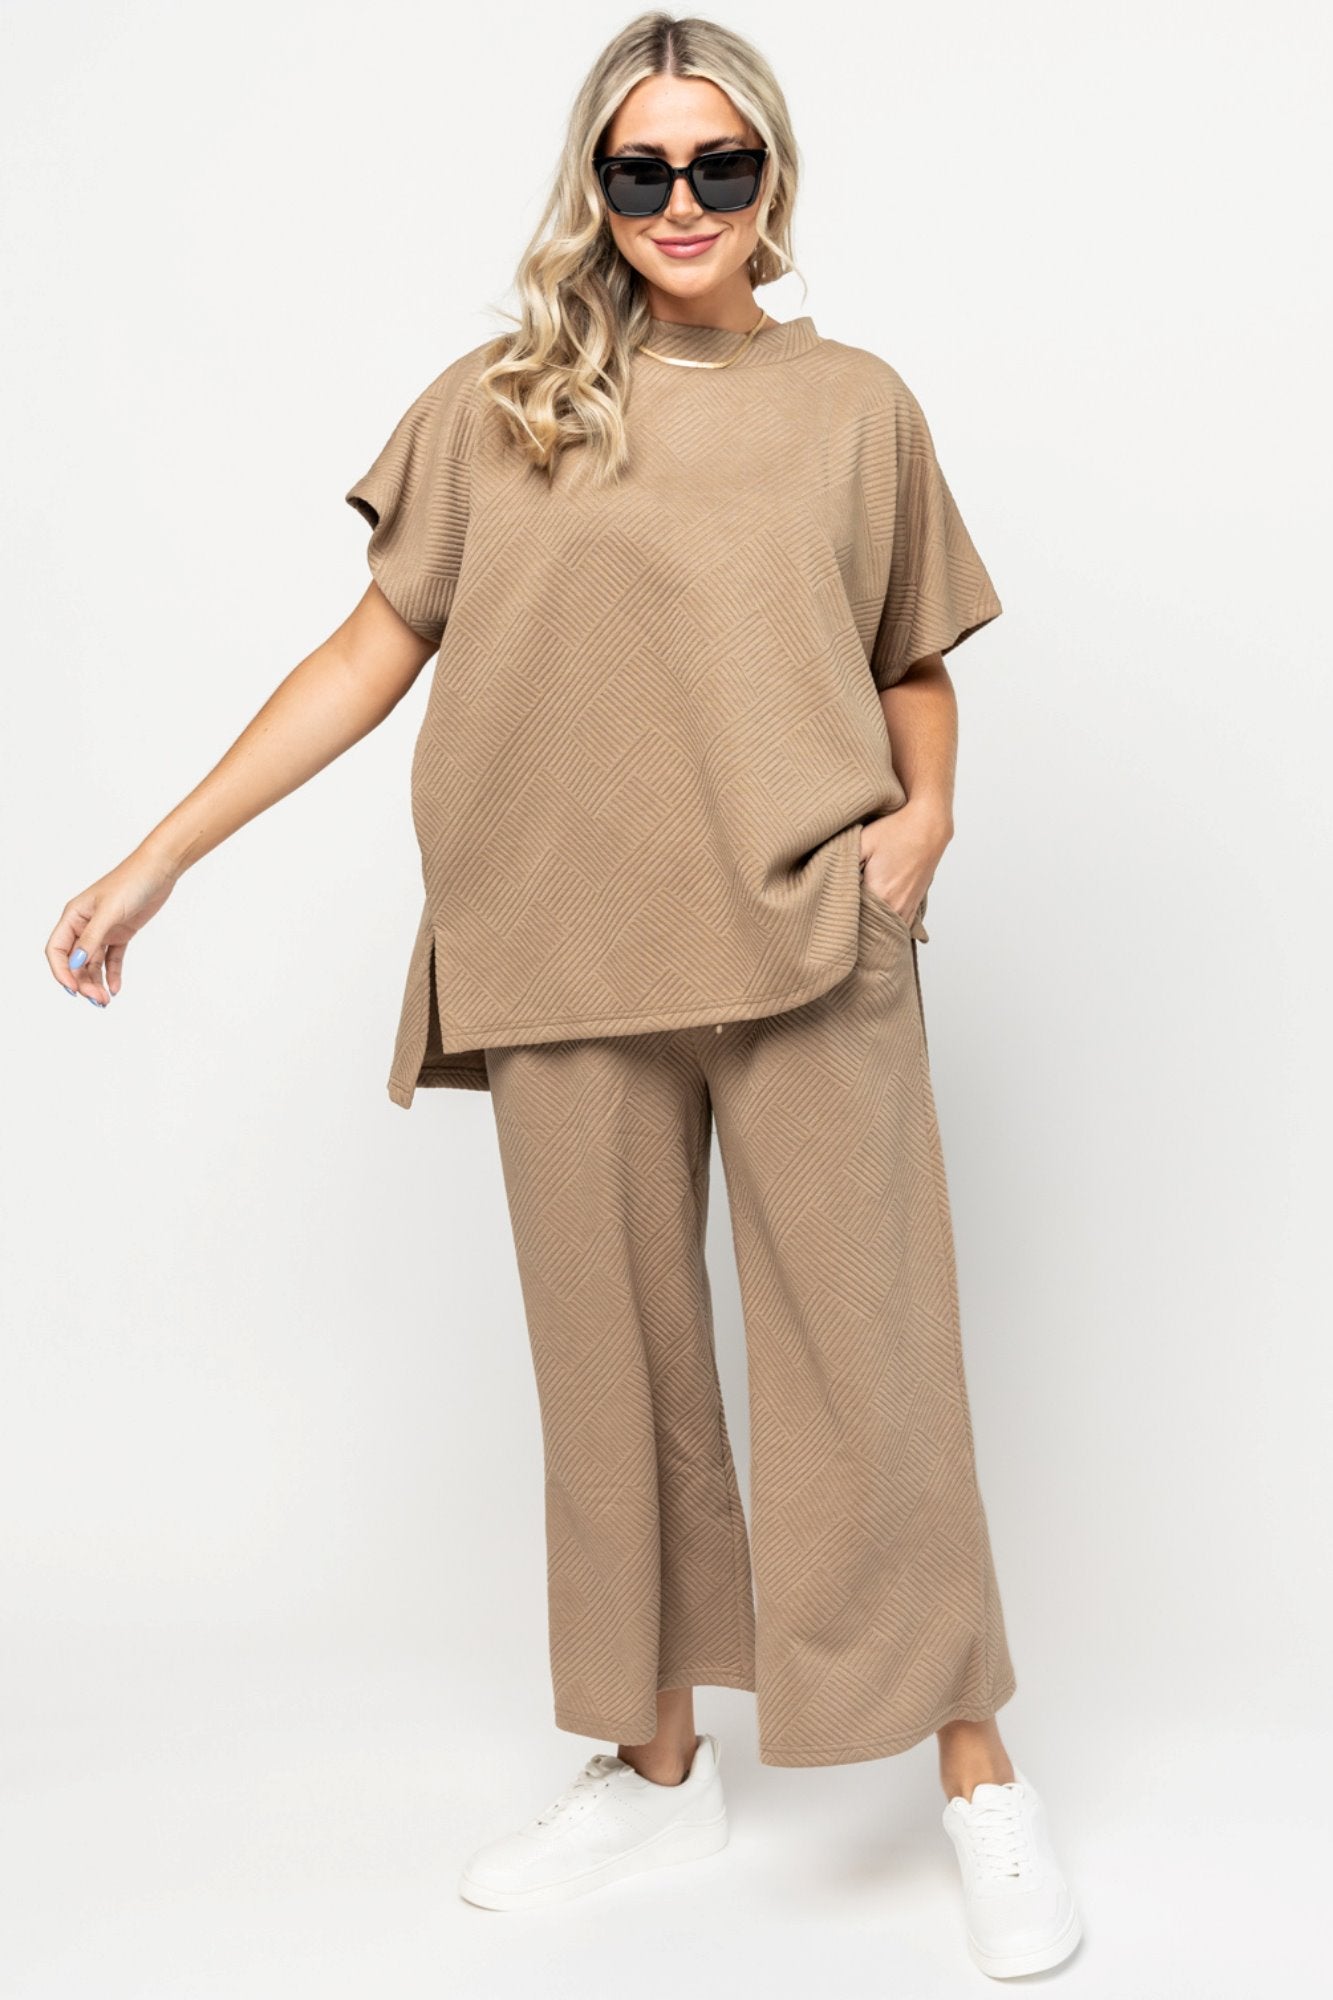 Addison Pant in Sand Holley Girl 